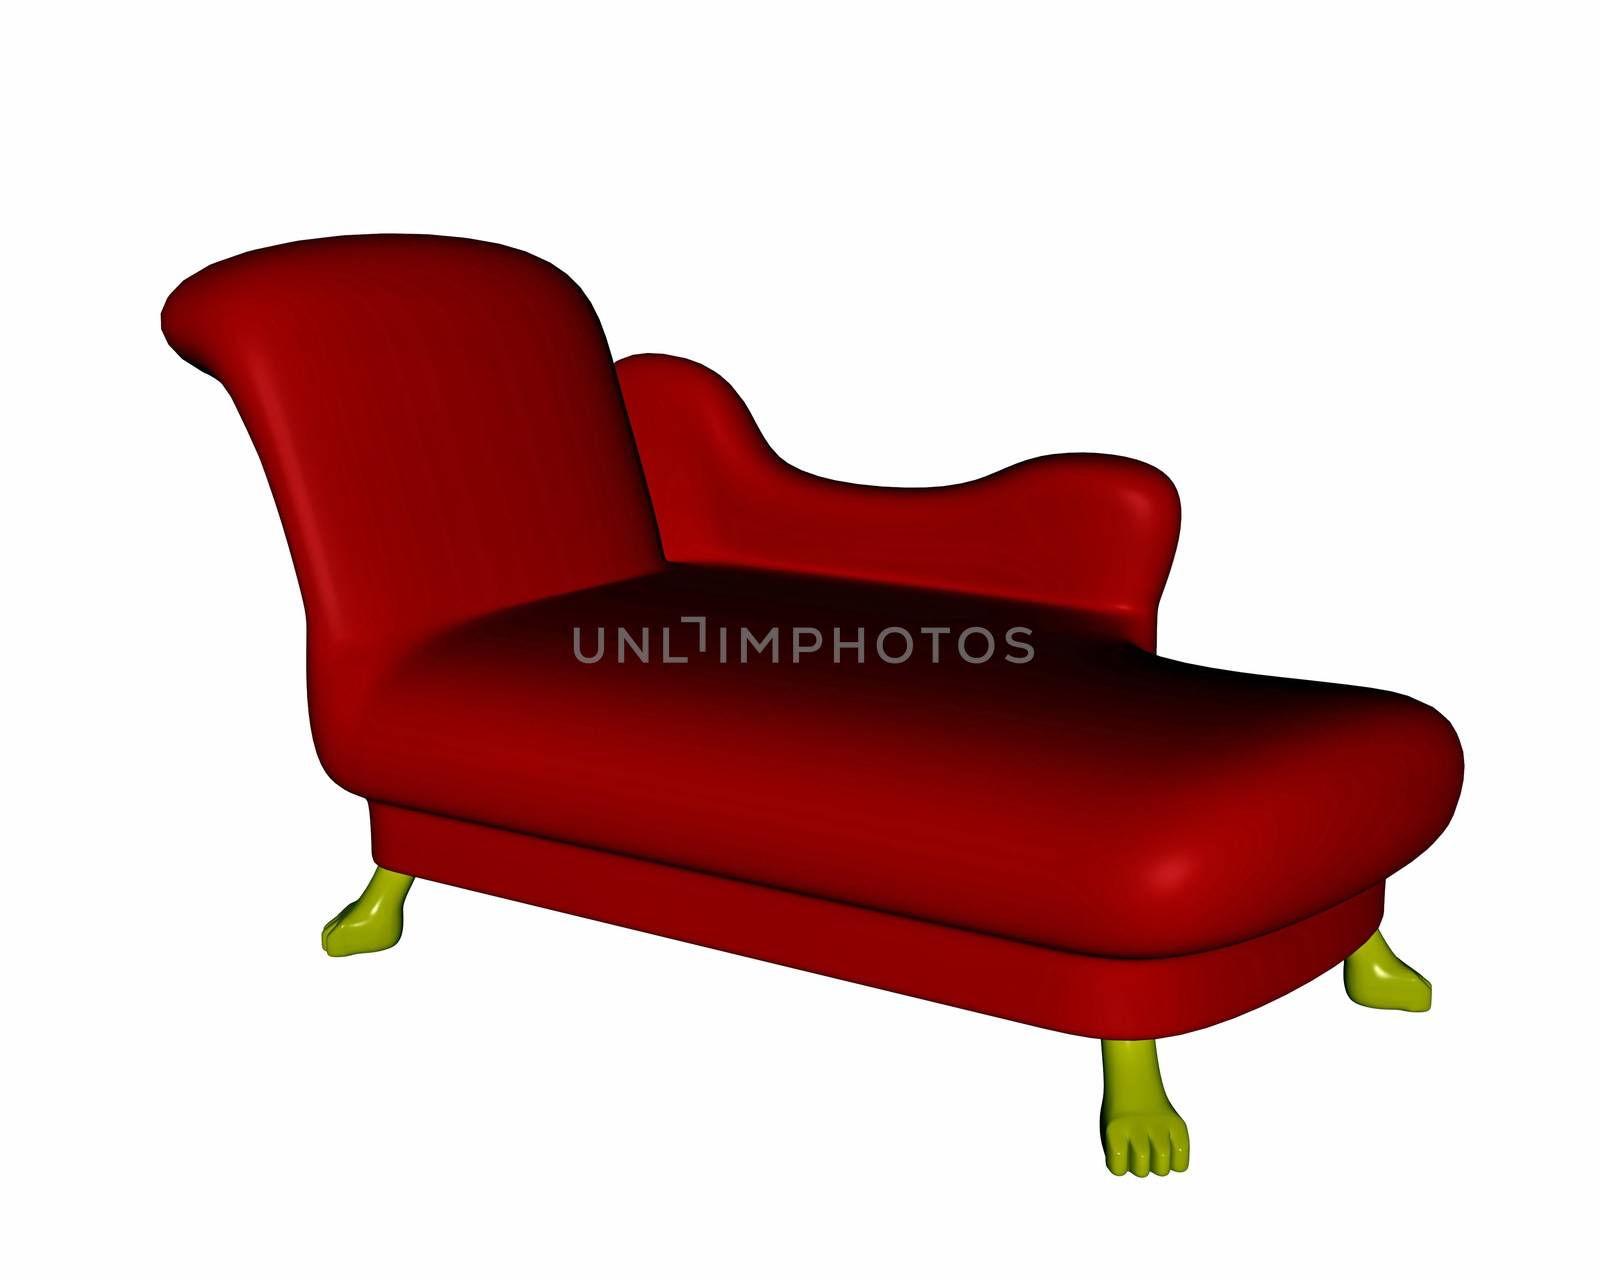 Red vintage sofa for relaxation in white background